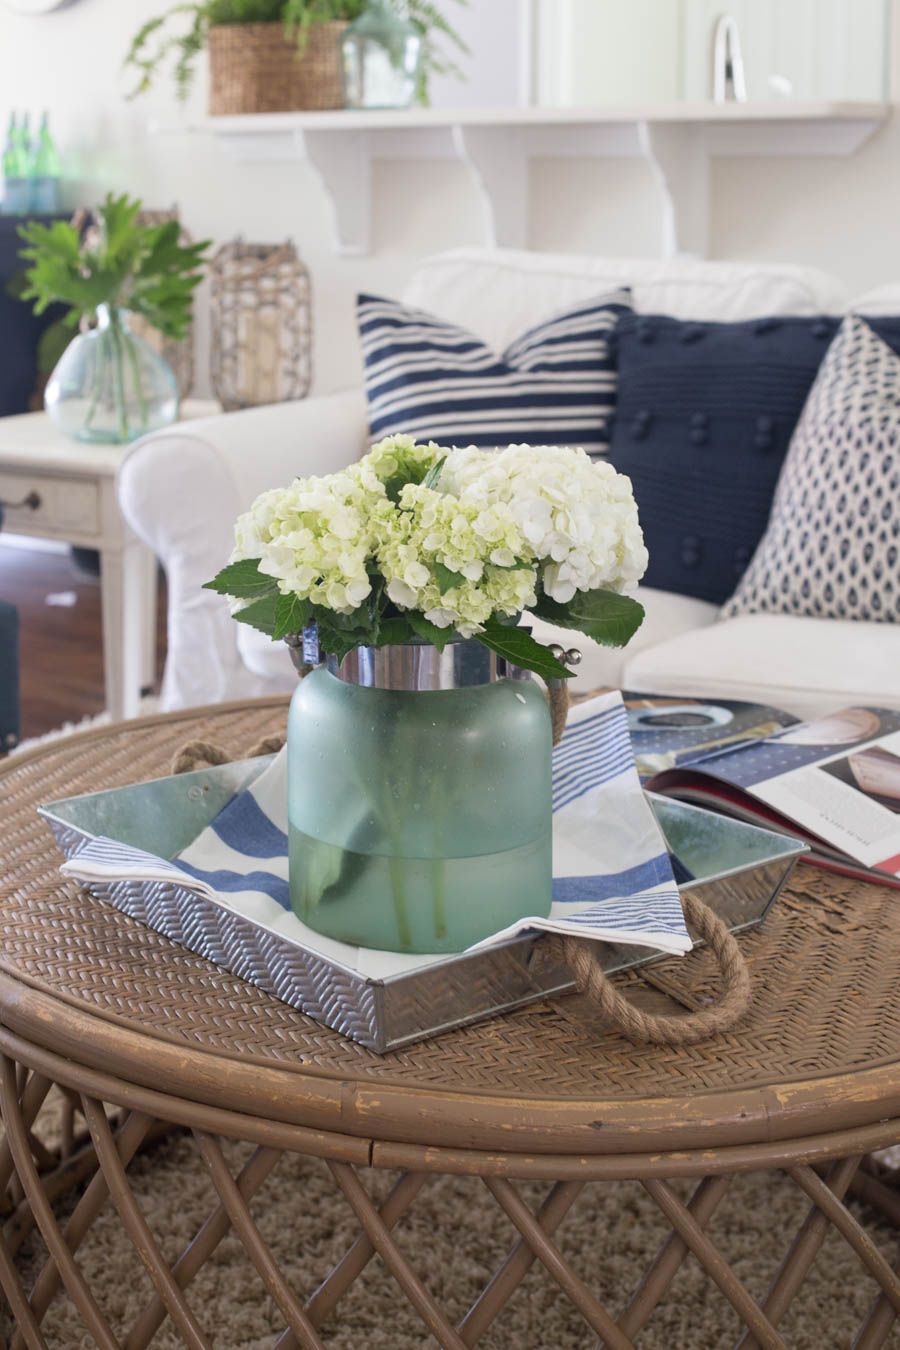 30 Summer Decorating Ideas - Easy Ways to Decorate Your Home for